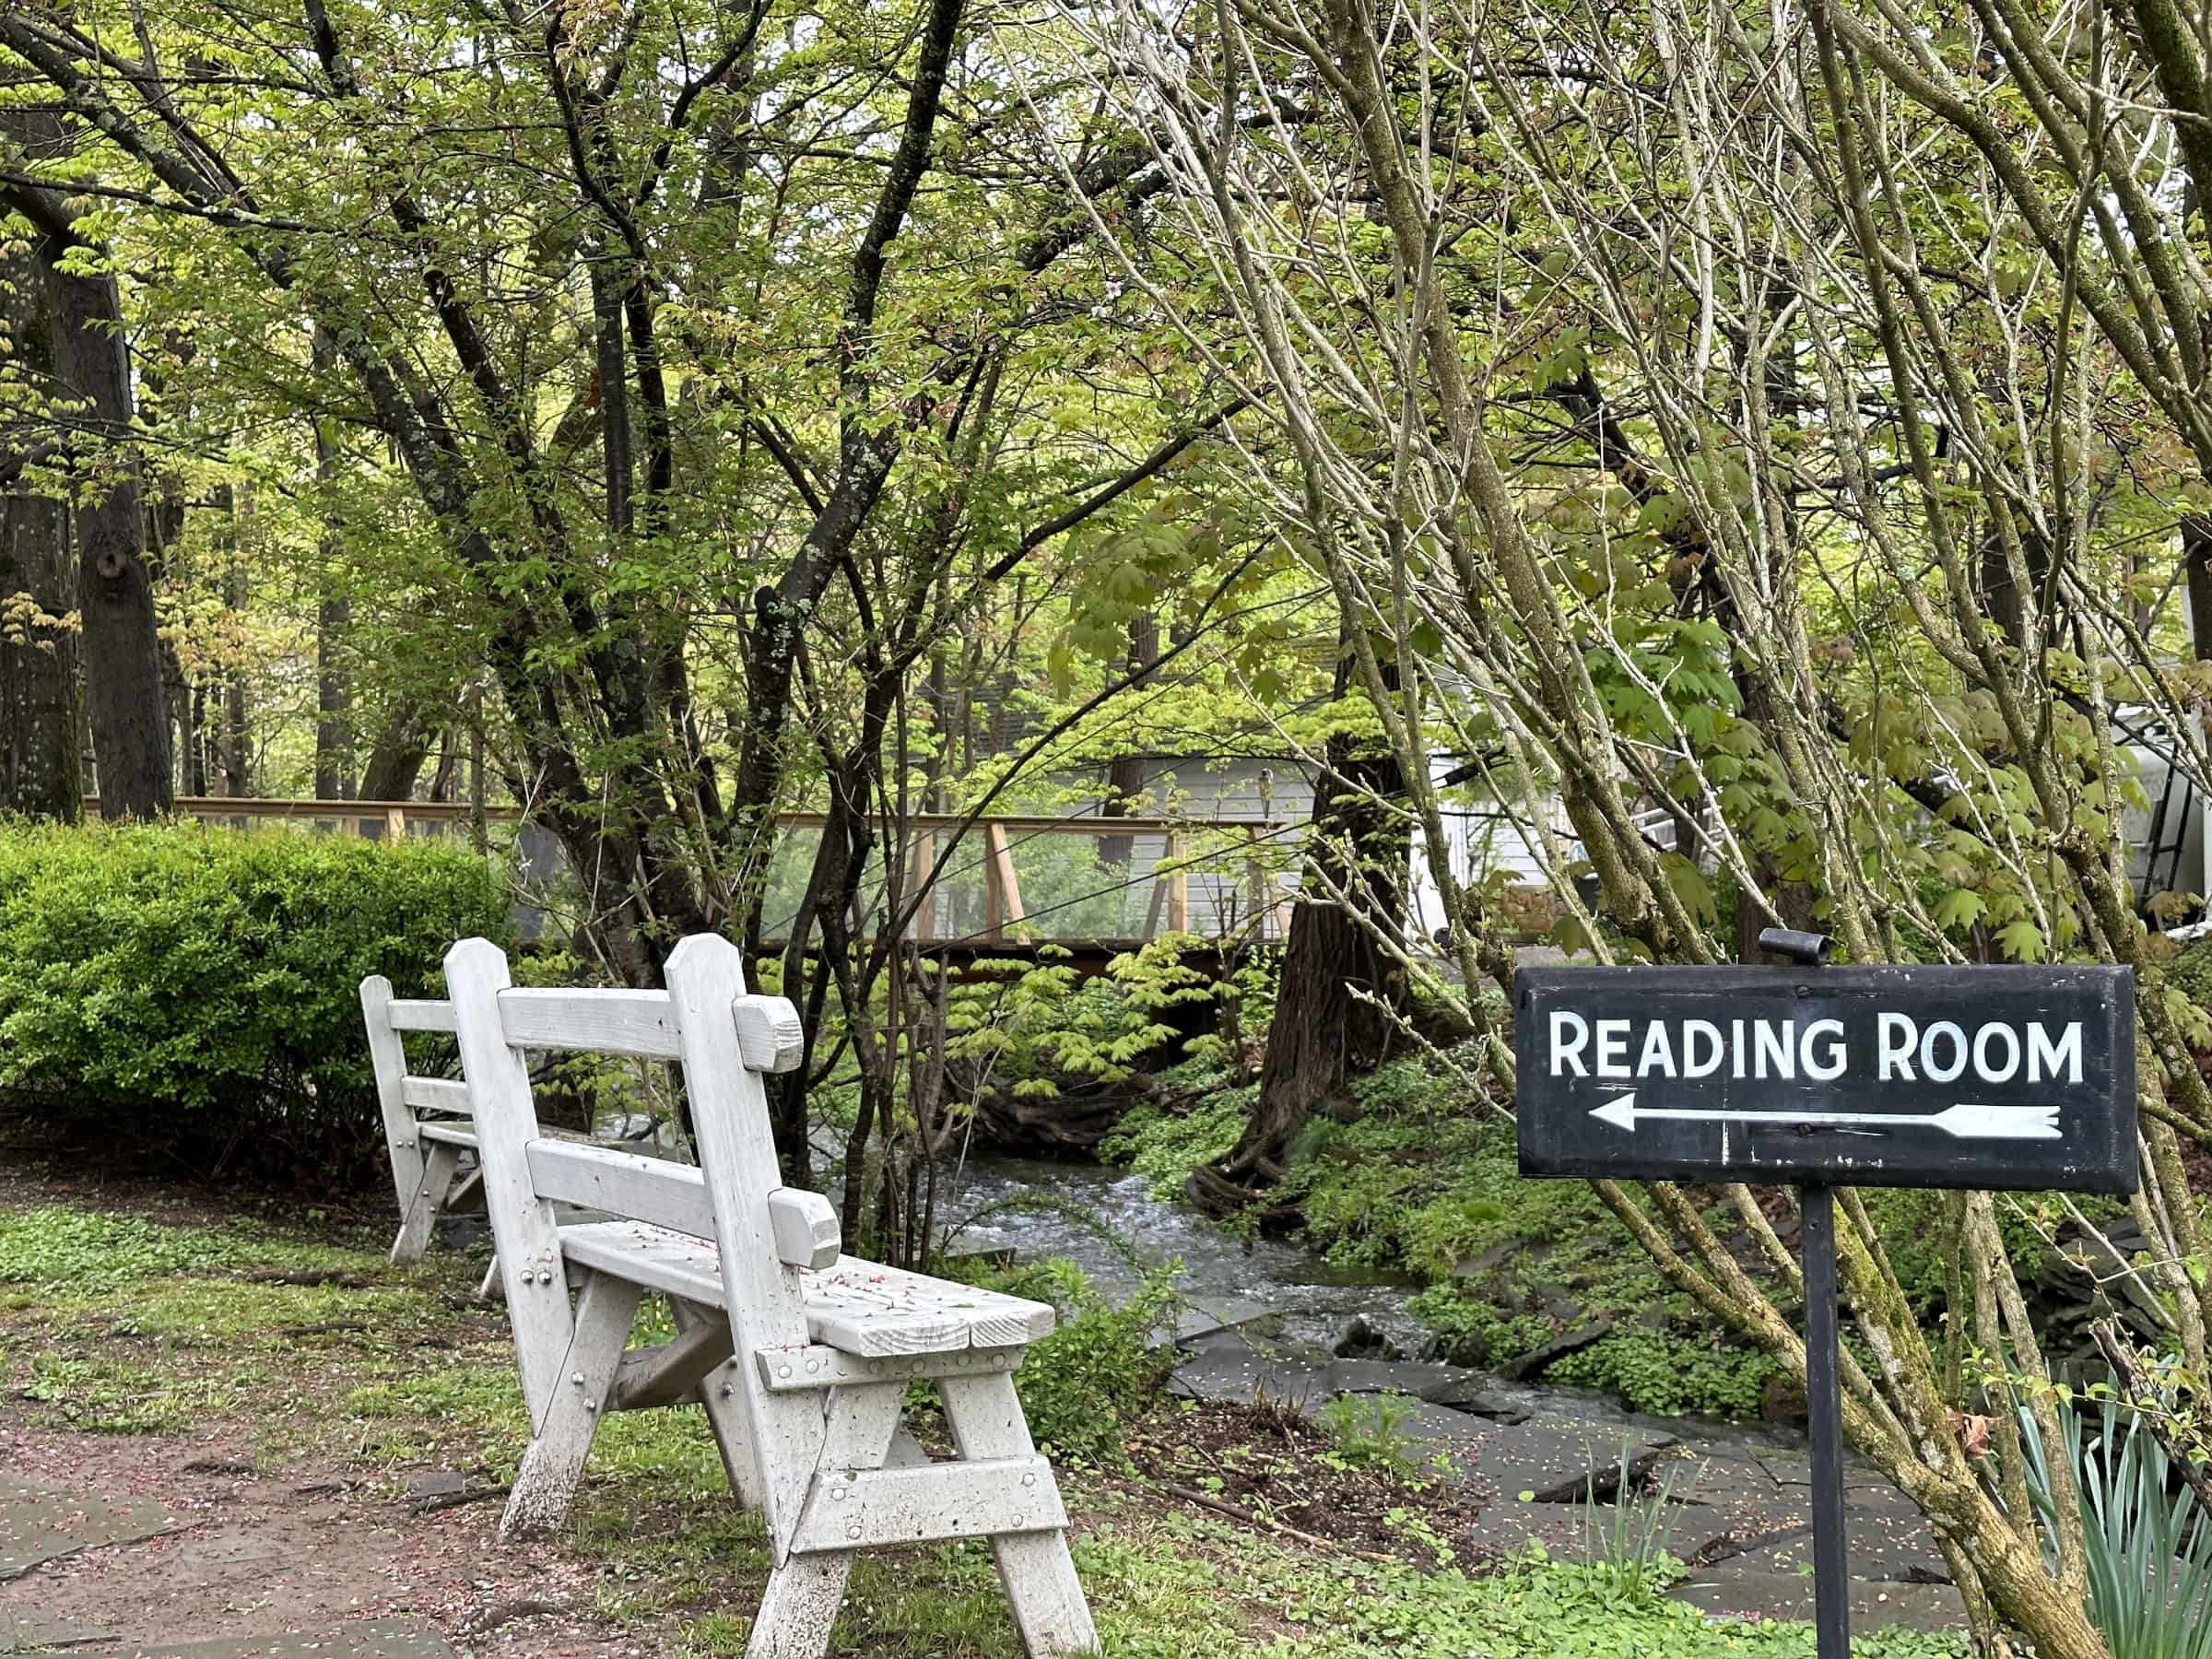 Sign to reading room